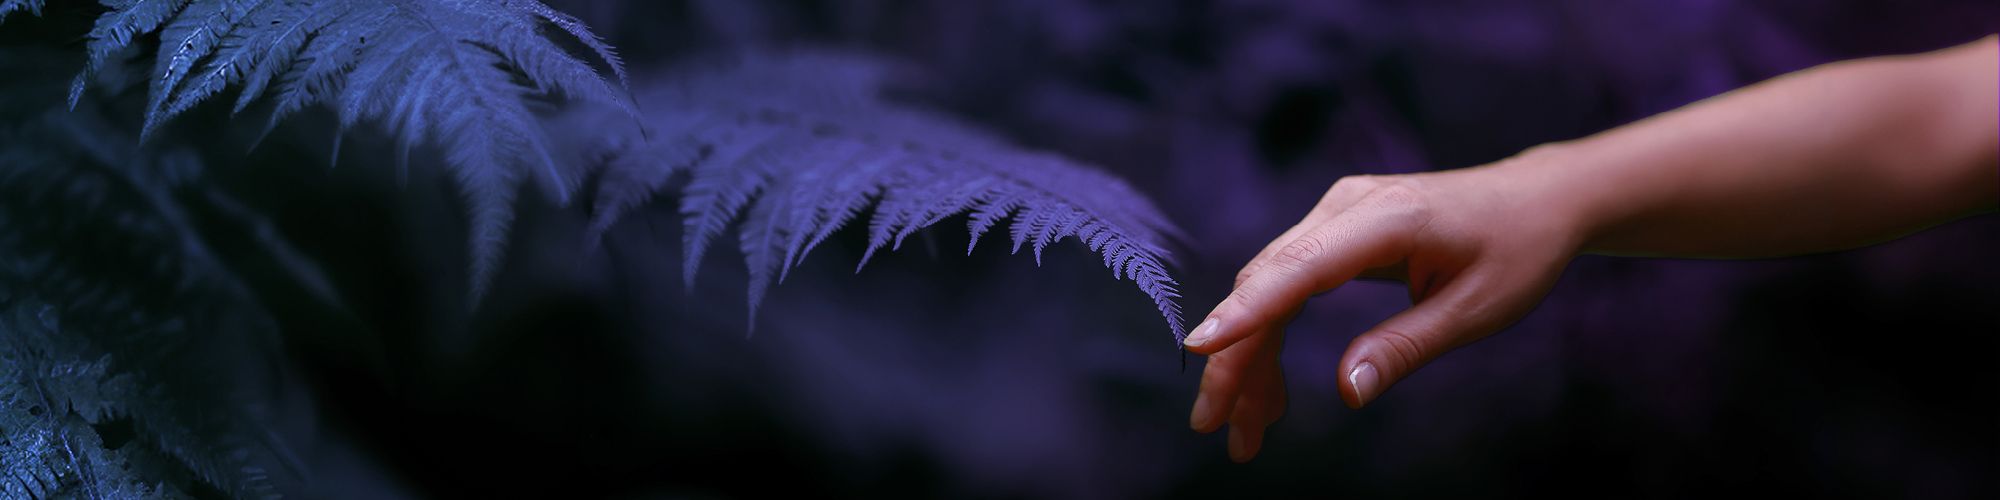 Hand touching a leaf